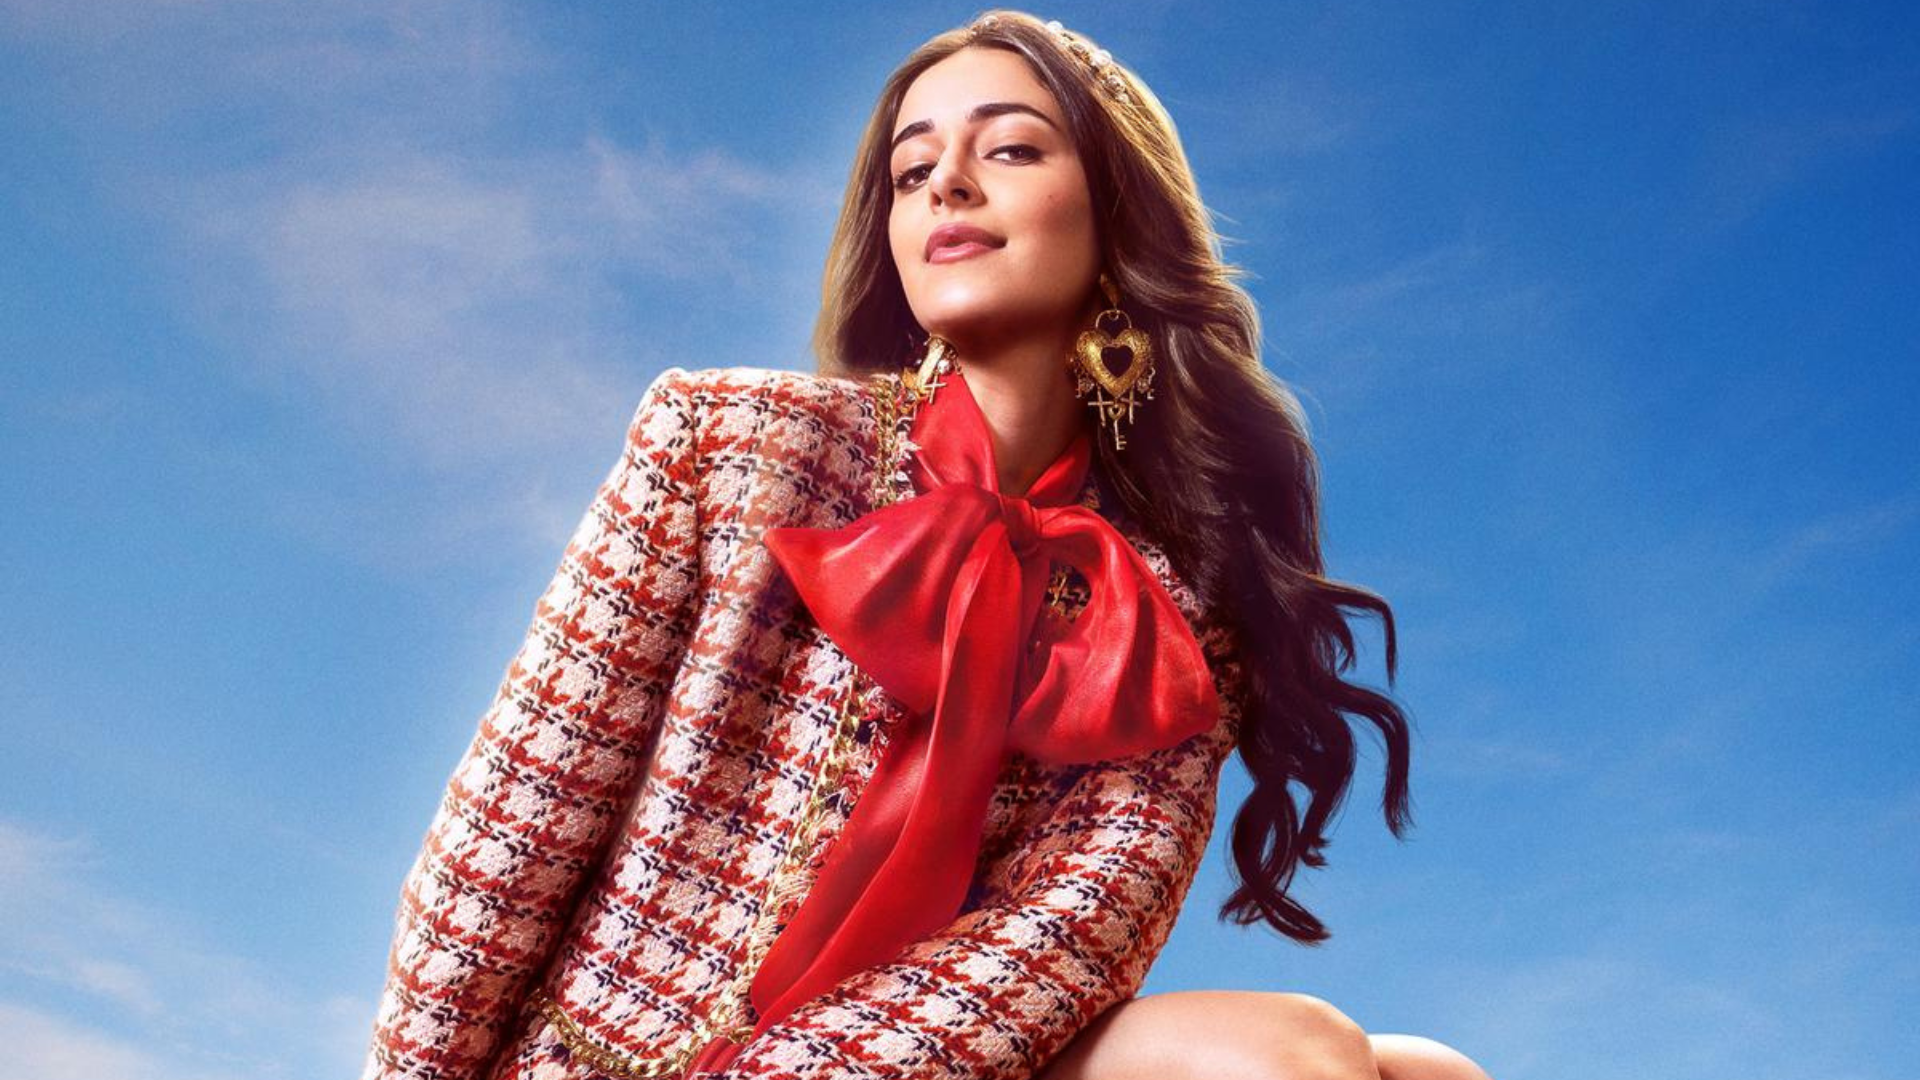 Inspired By Chanel’s Cotton Viscose, Ananya Panday’s ‘Call Me Bae’ Poster Outfit Will Make The Boys Go Weak In Their Knees